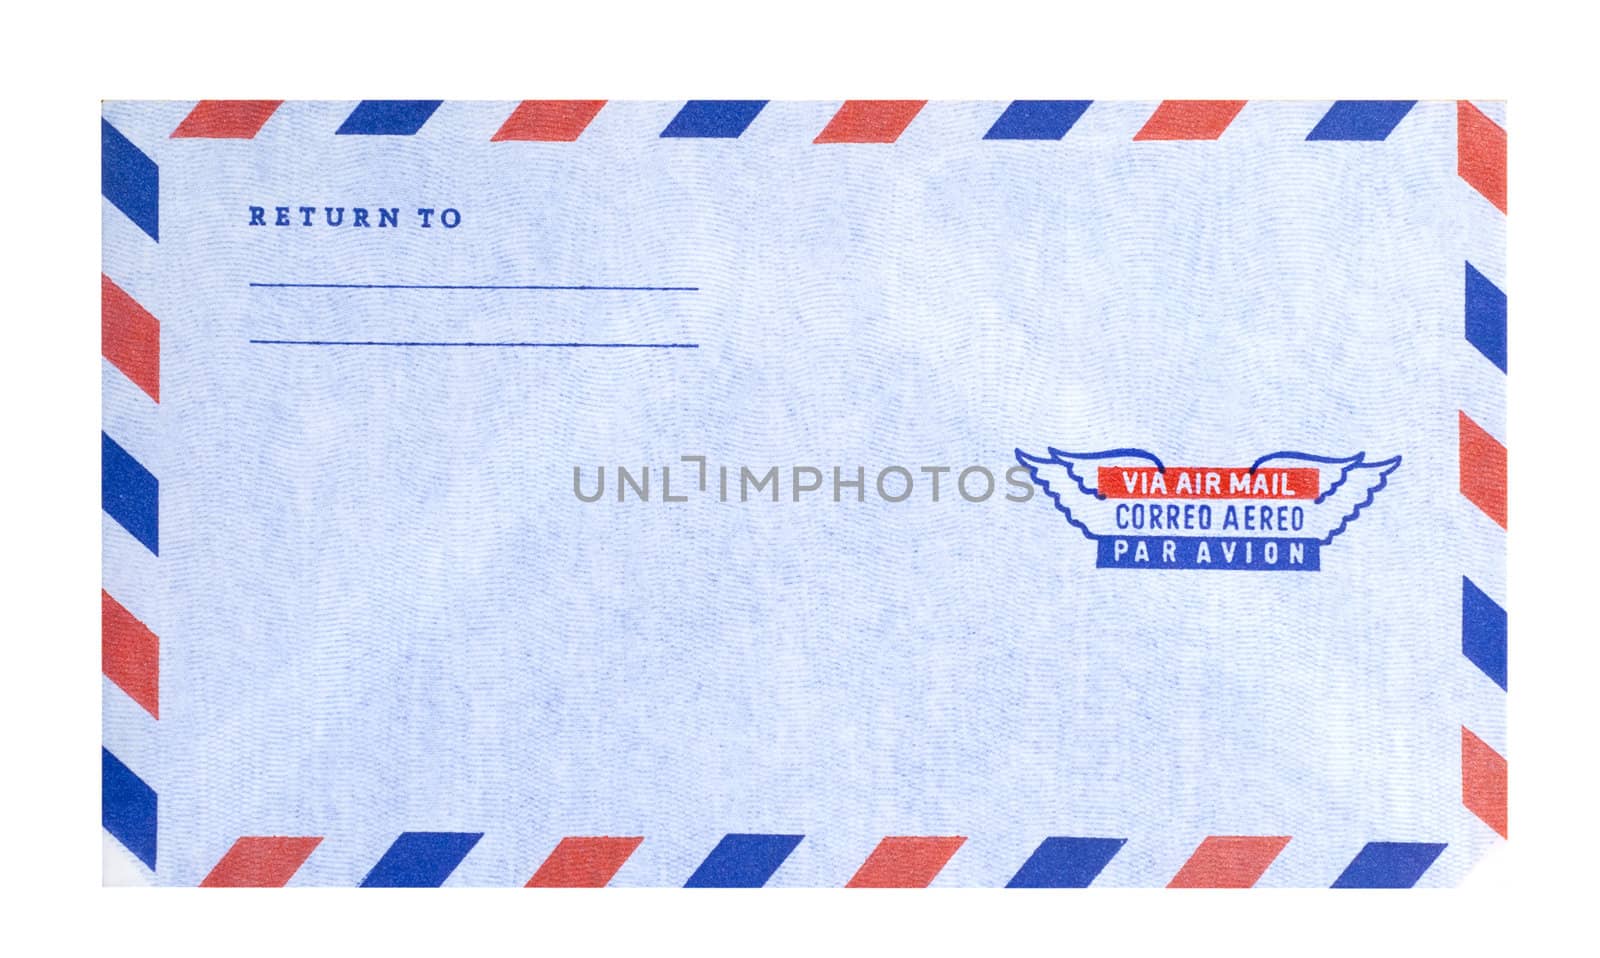 Airmail letter envelope on white, isolated